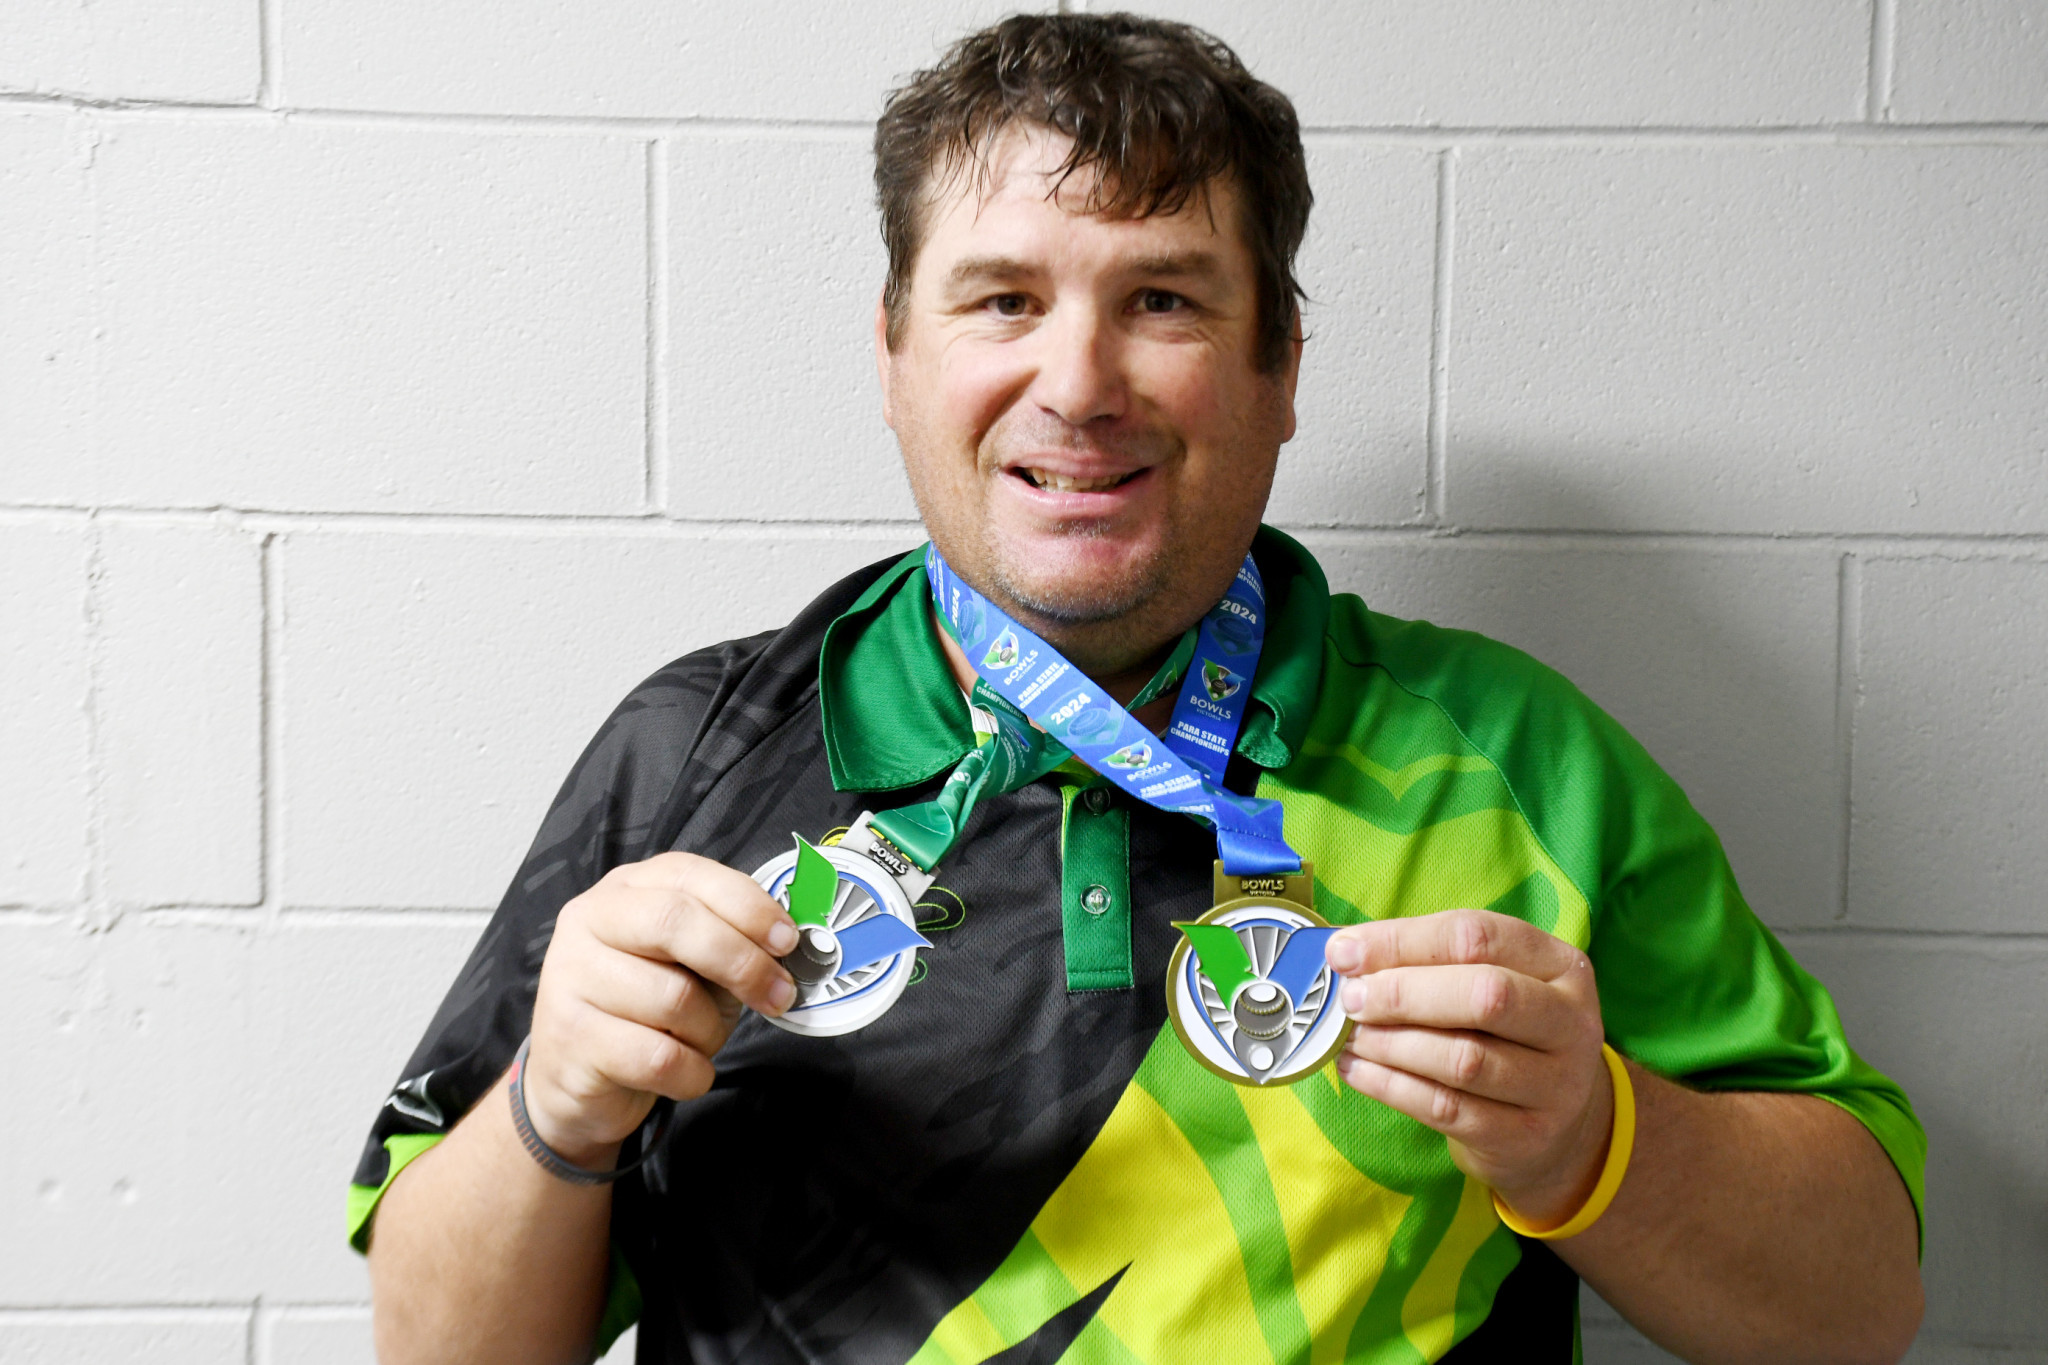 A proud Josh Barry showing off his medals. PHOTO: CHRIS GRAETZ